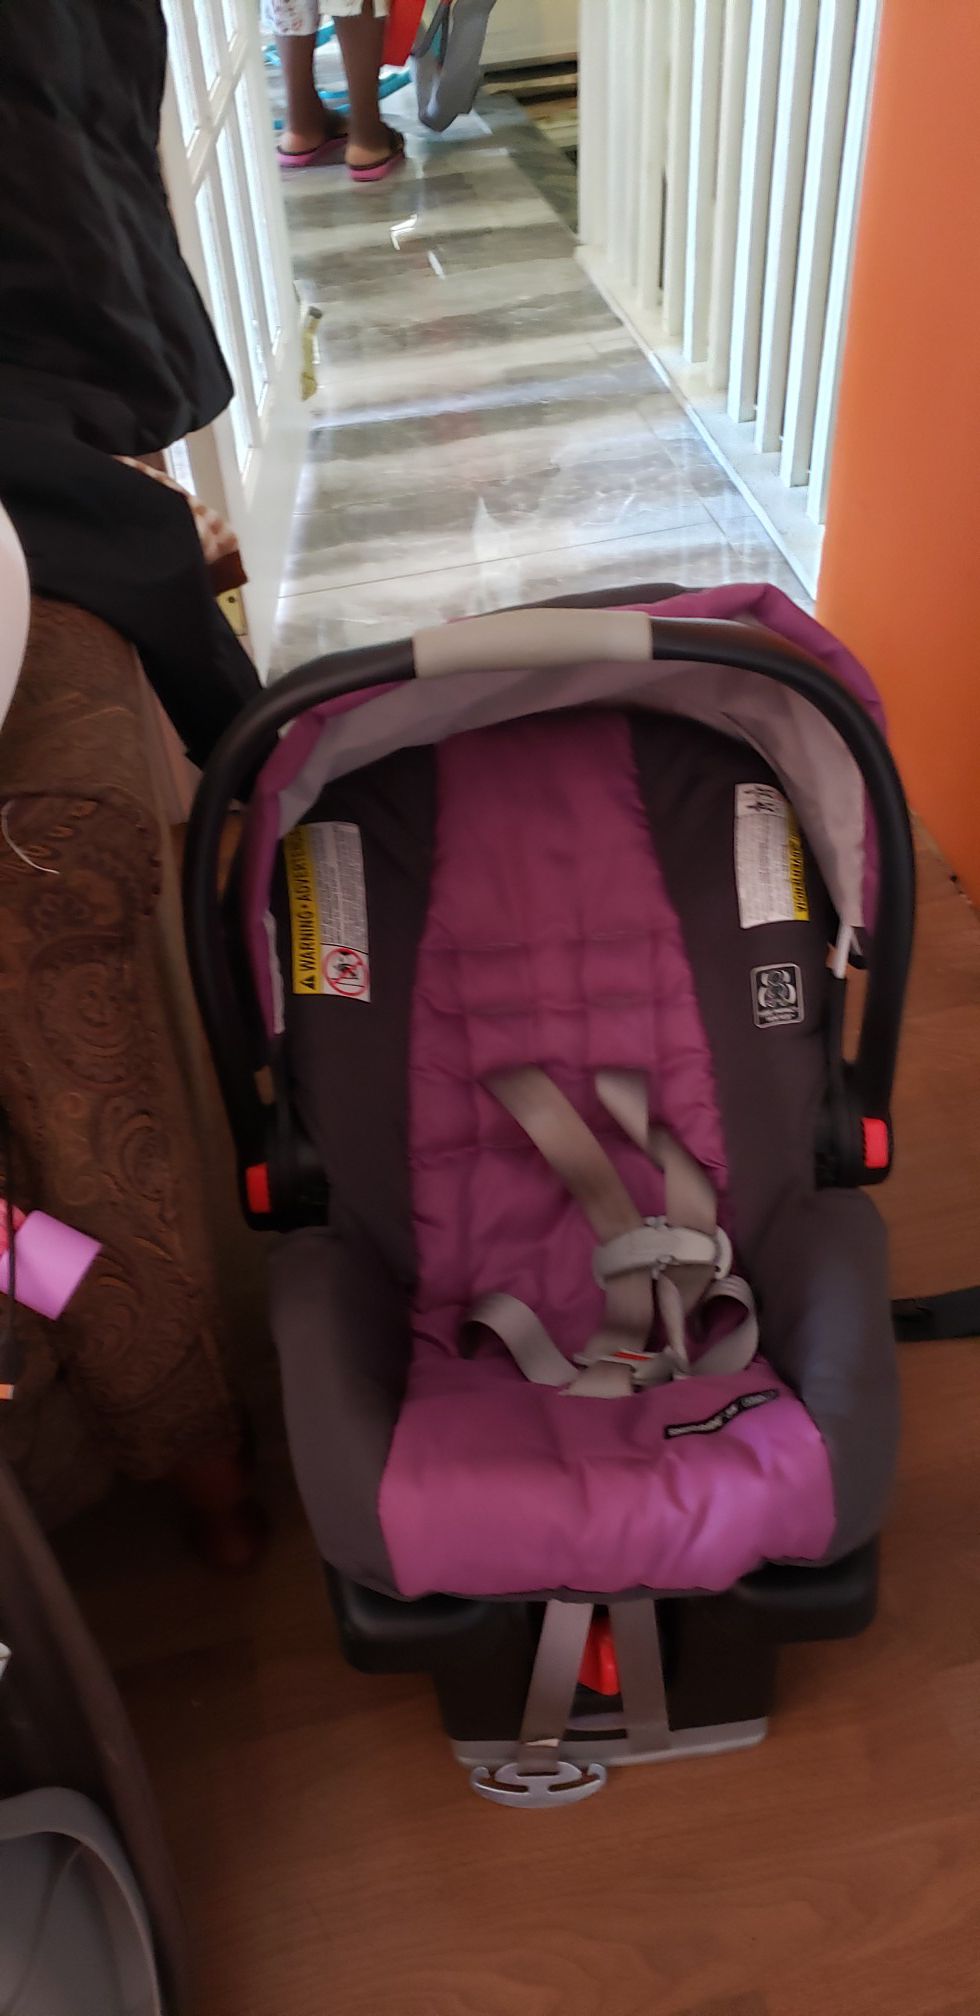 Used pink and great car seat for baby